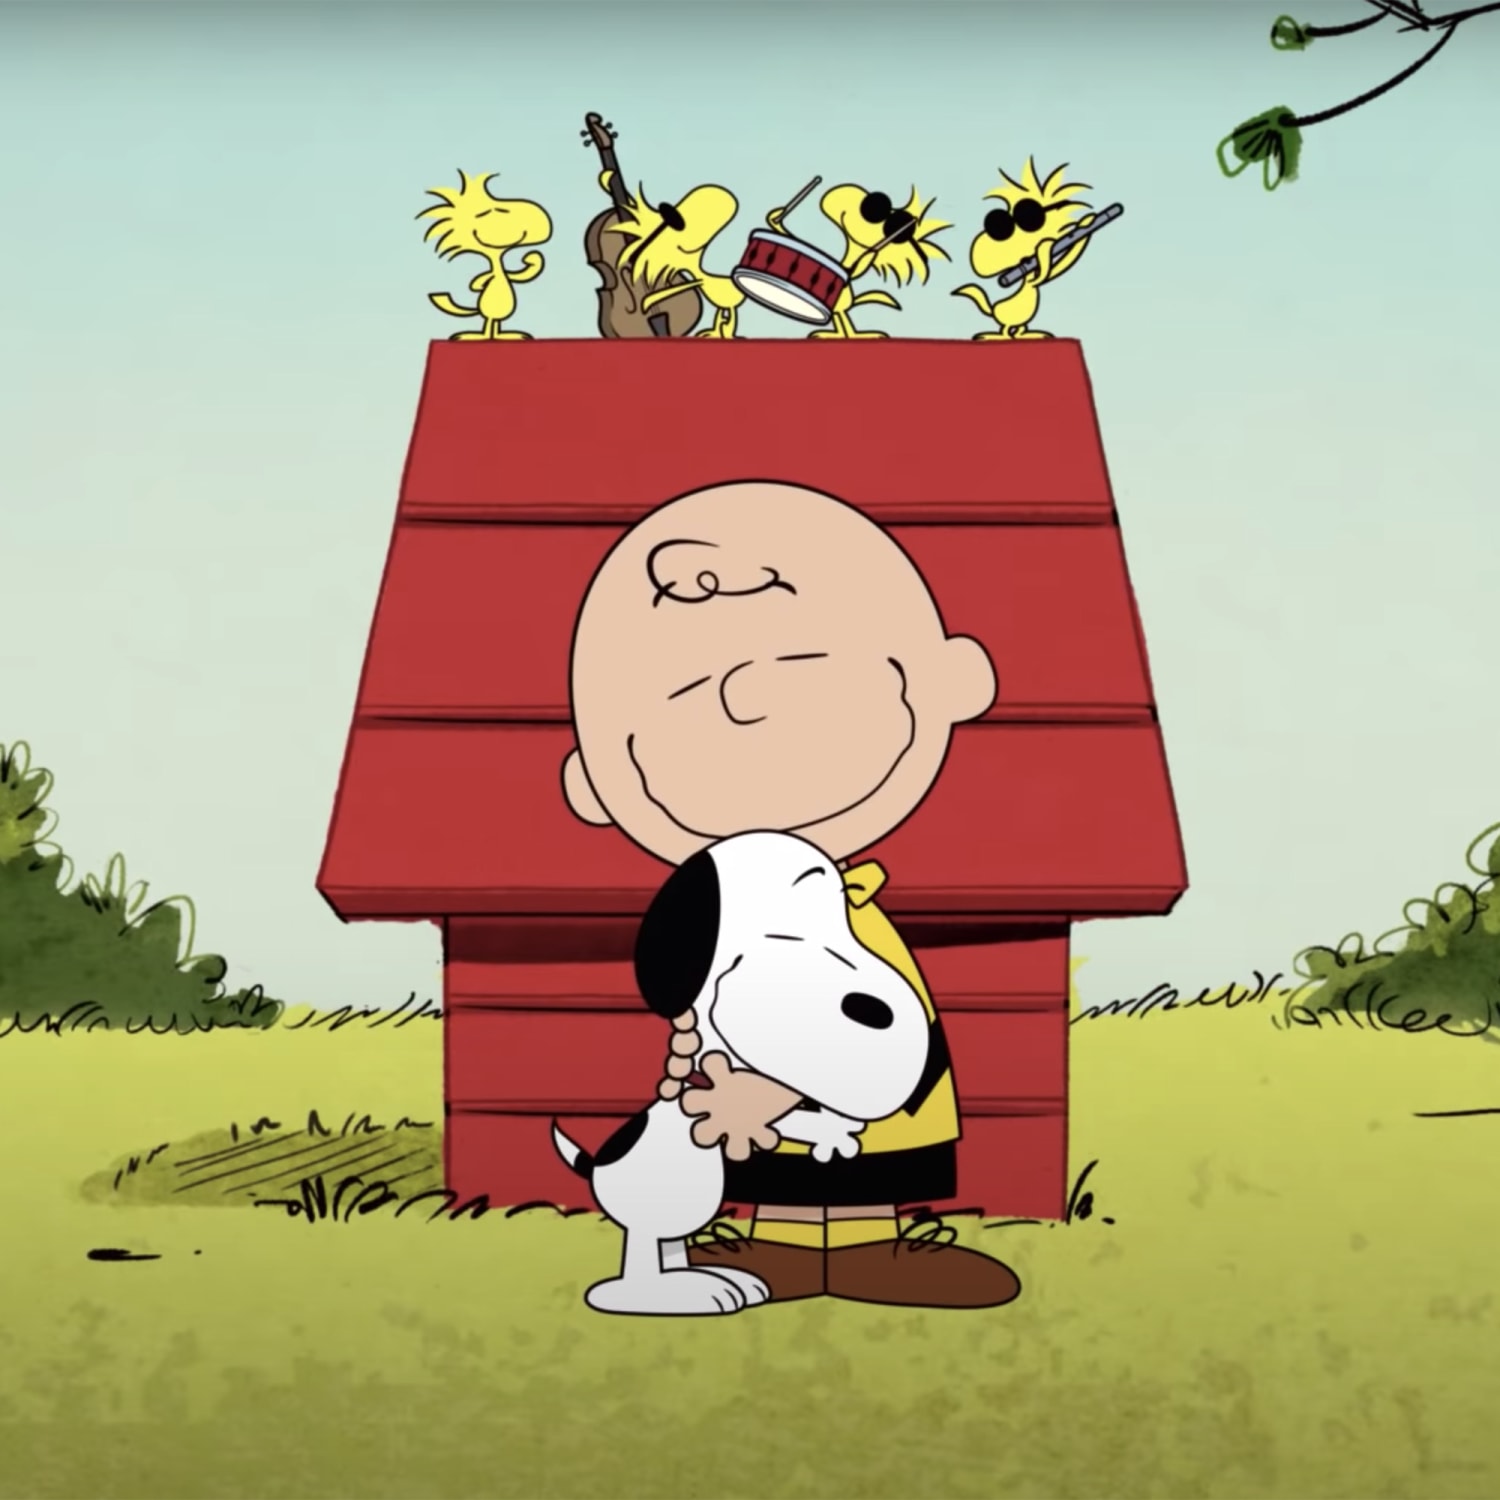 Watch the 'Peanuts' gang return in 'The Snoopy Show' trailer